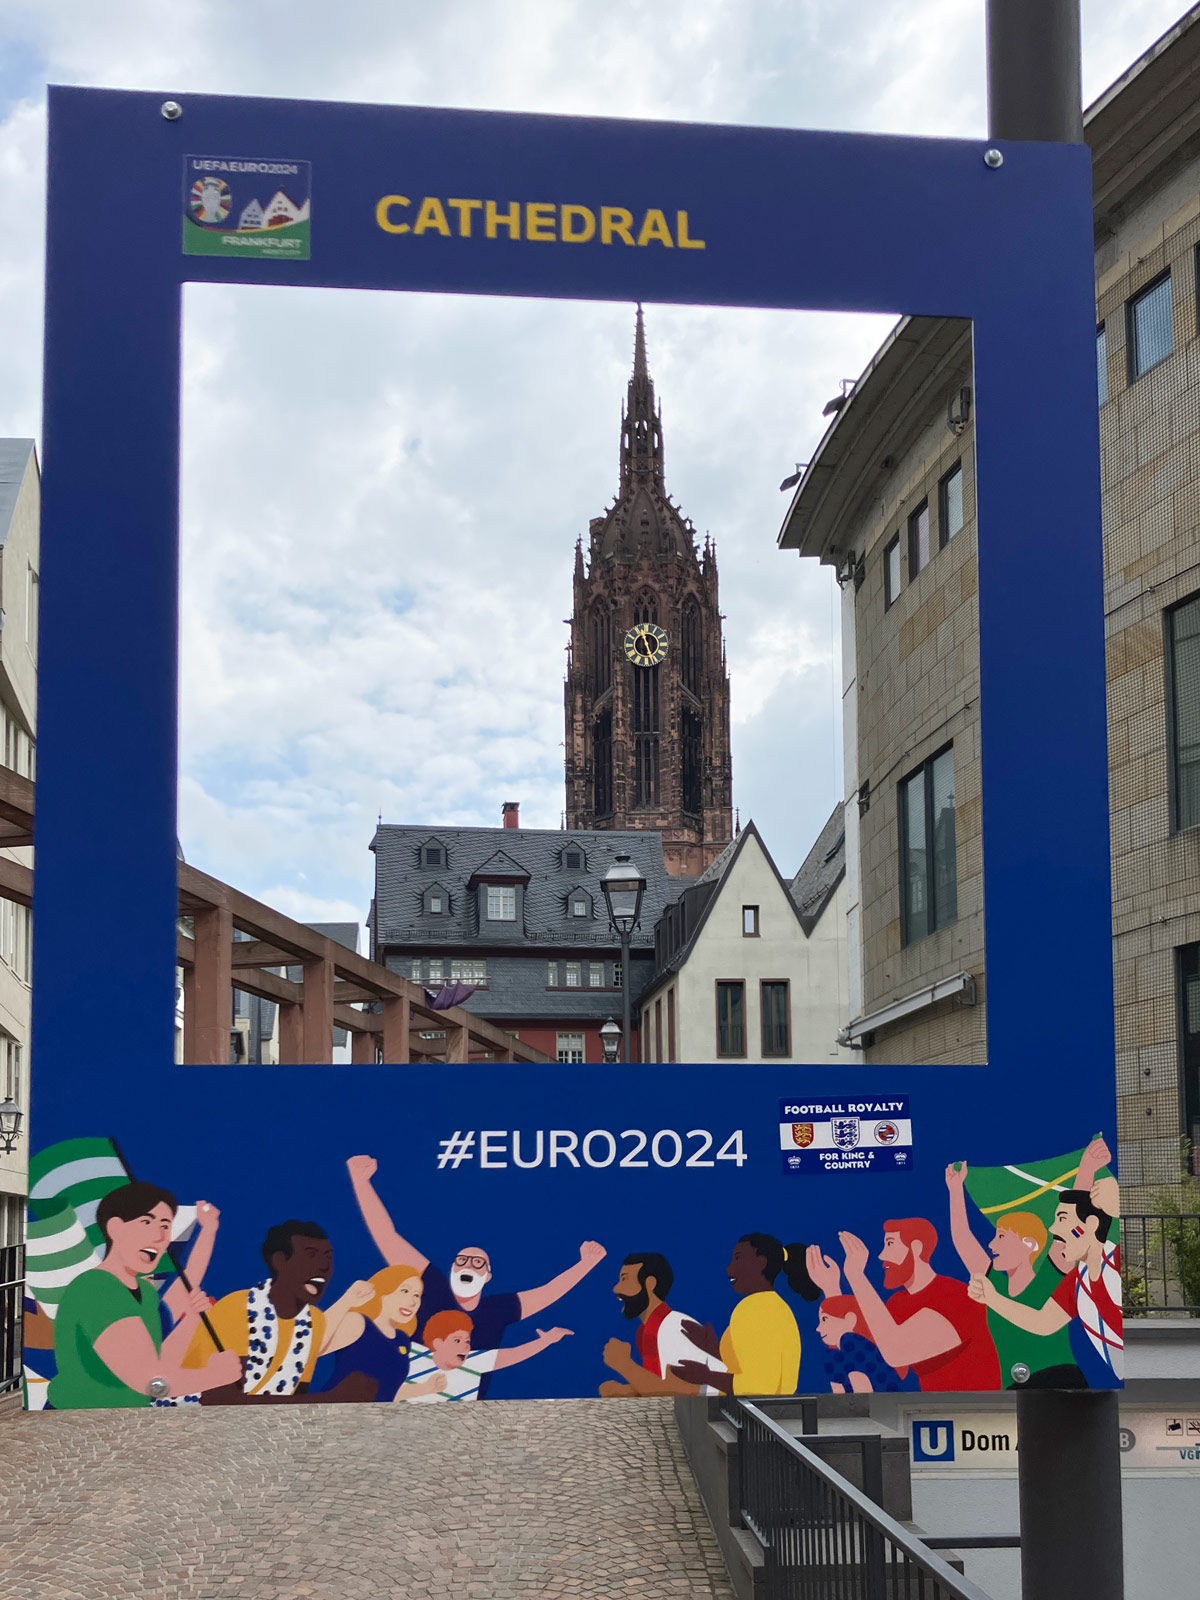 EURO 2024 Sightseeing Frames in Frankfurt - Cathedral